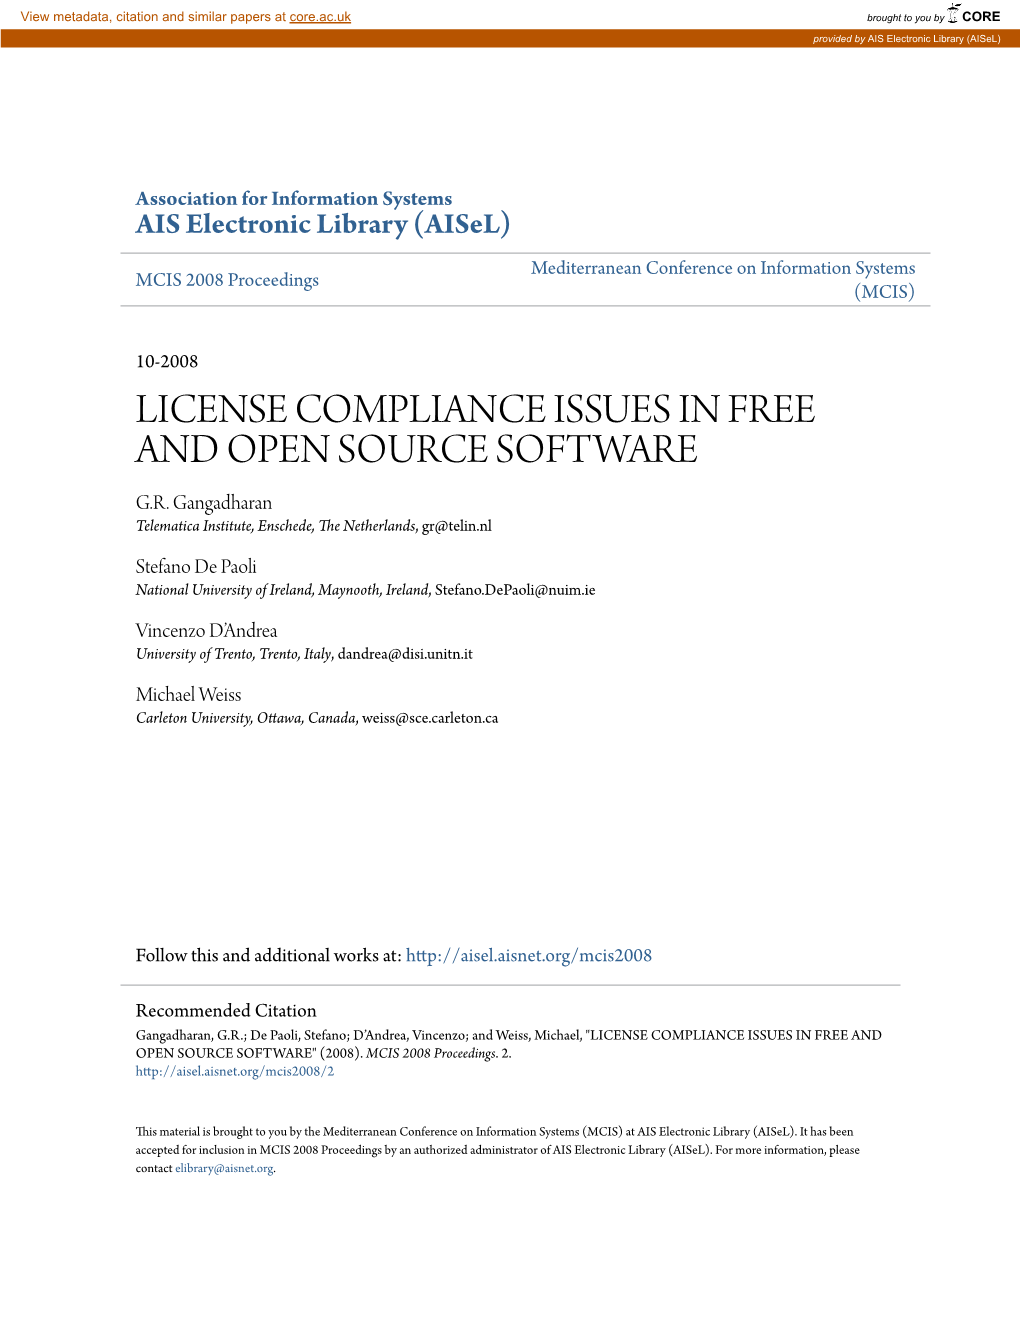 License Compliance Issues in Free and Open Source Software G.R